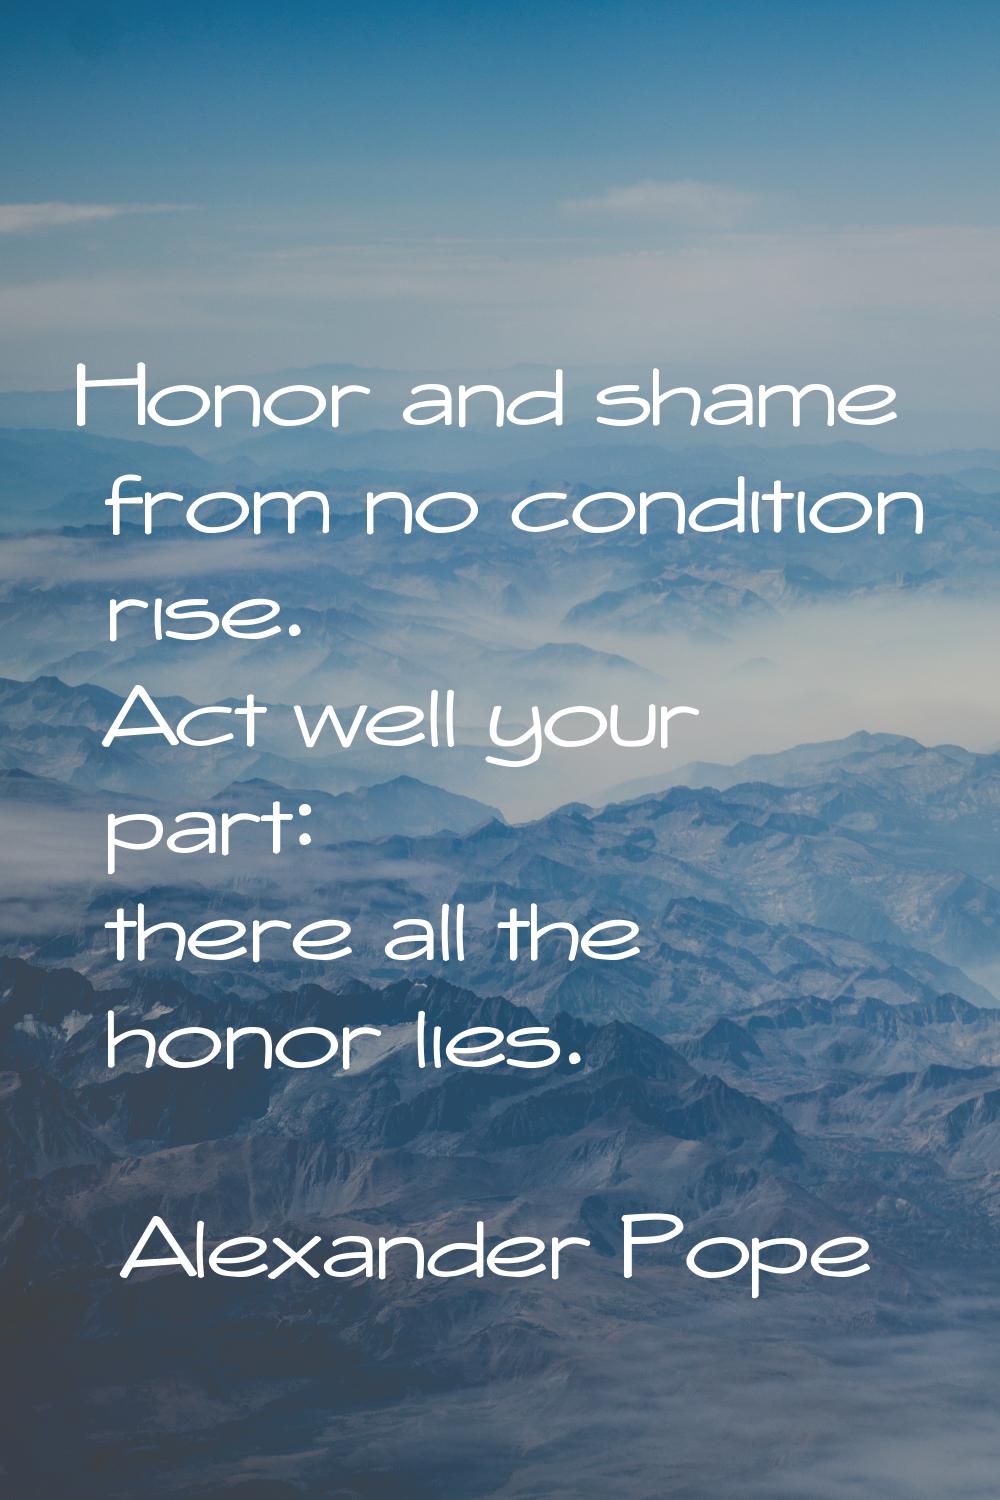 Honor and shame from no condition rise. Act well your part: there all the honor lies.